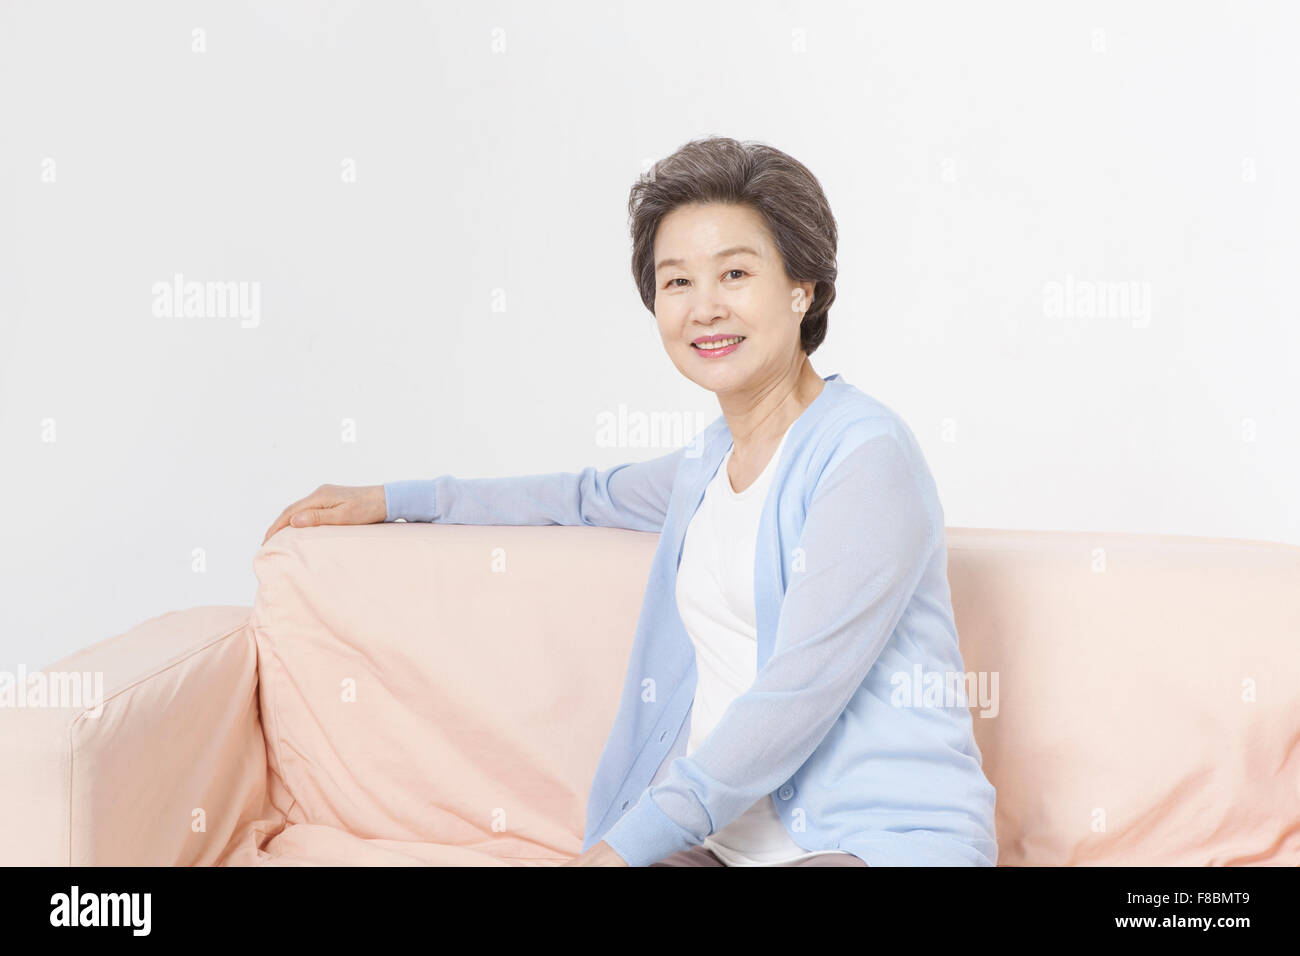 Senior woman with short hair in blue cardigan sitting on a couch and staring forward with a smile Stock Photo